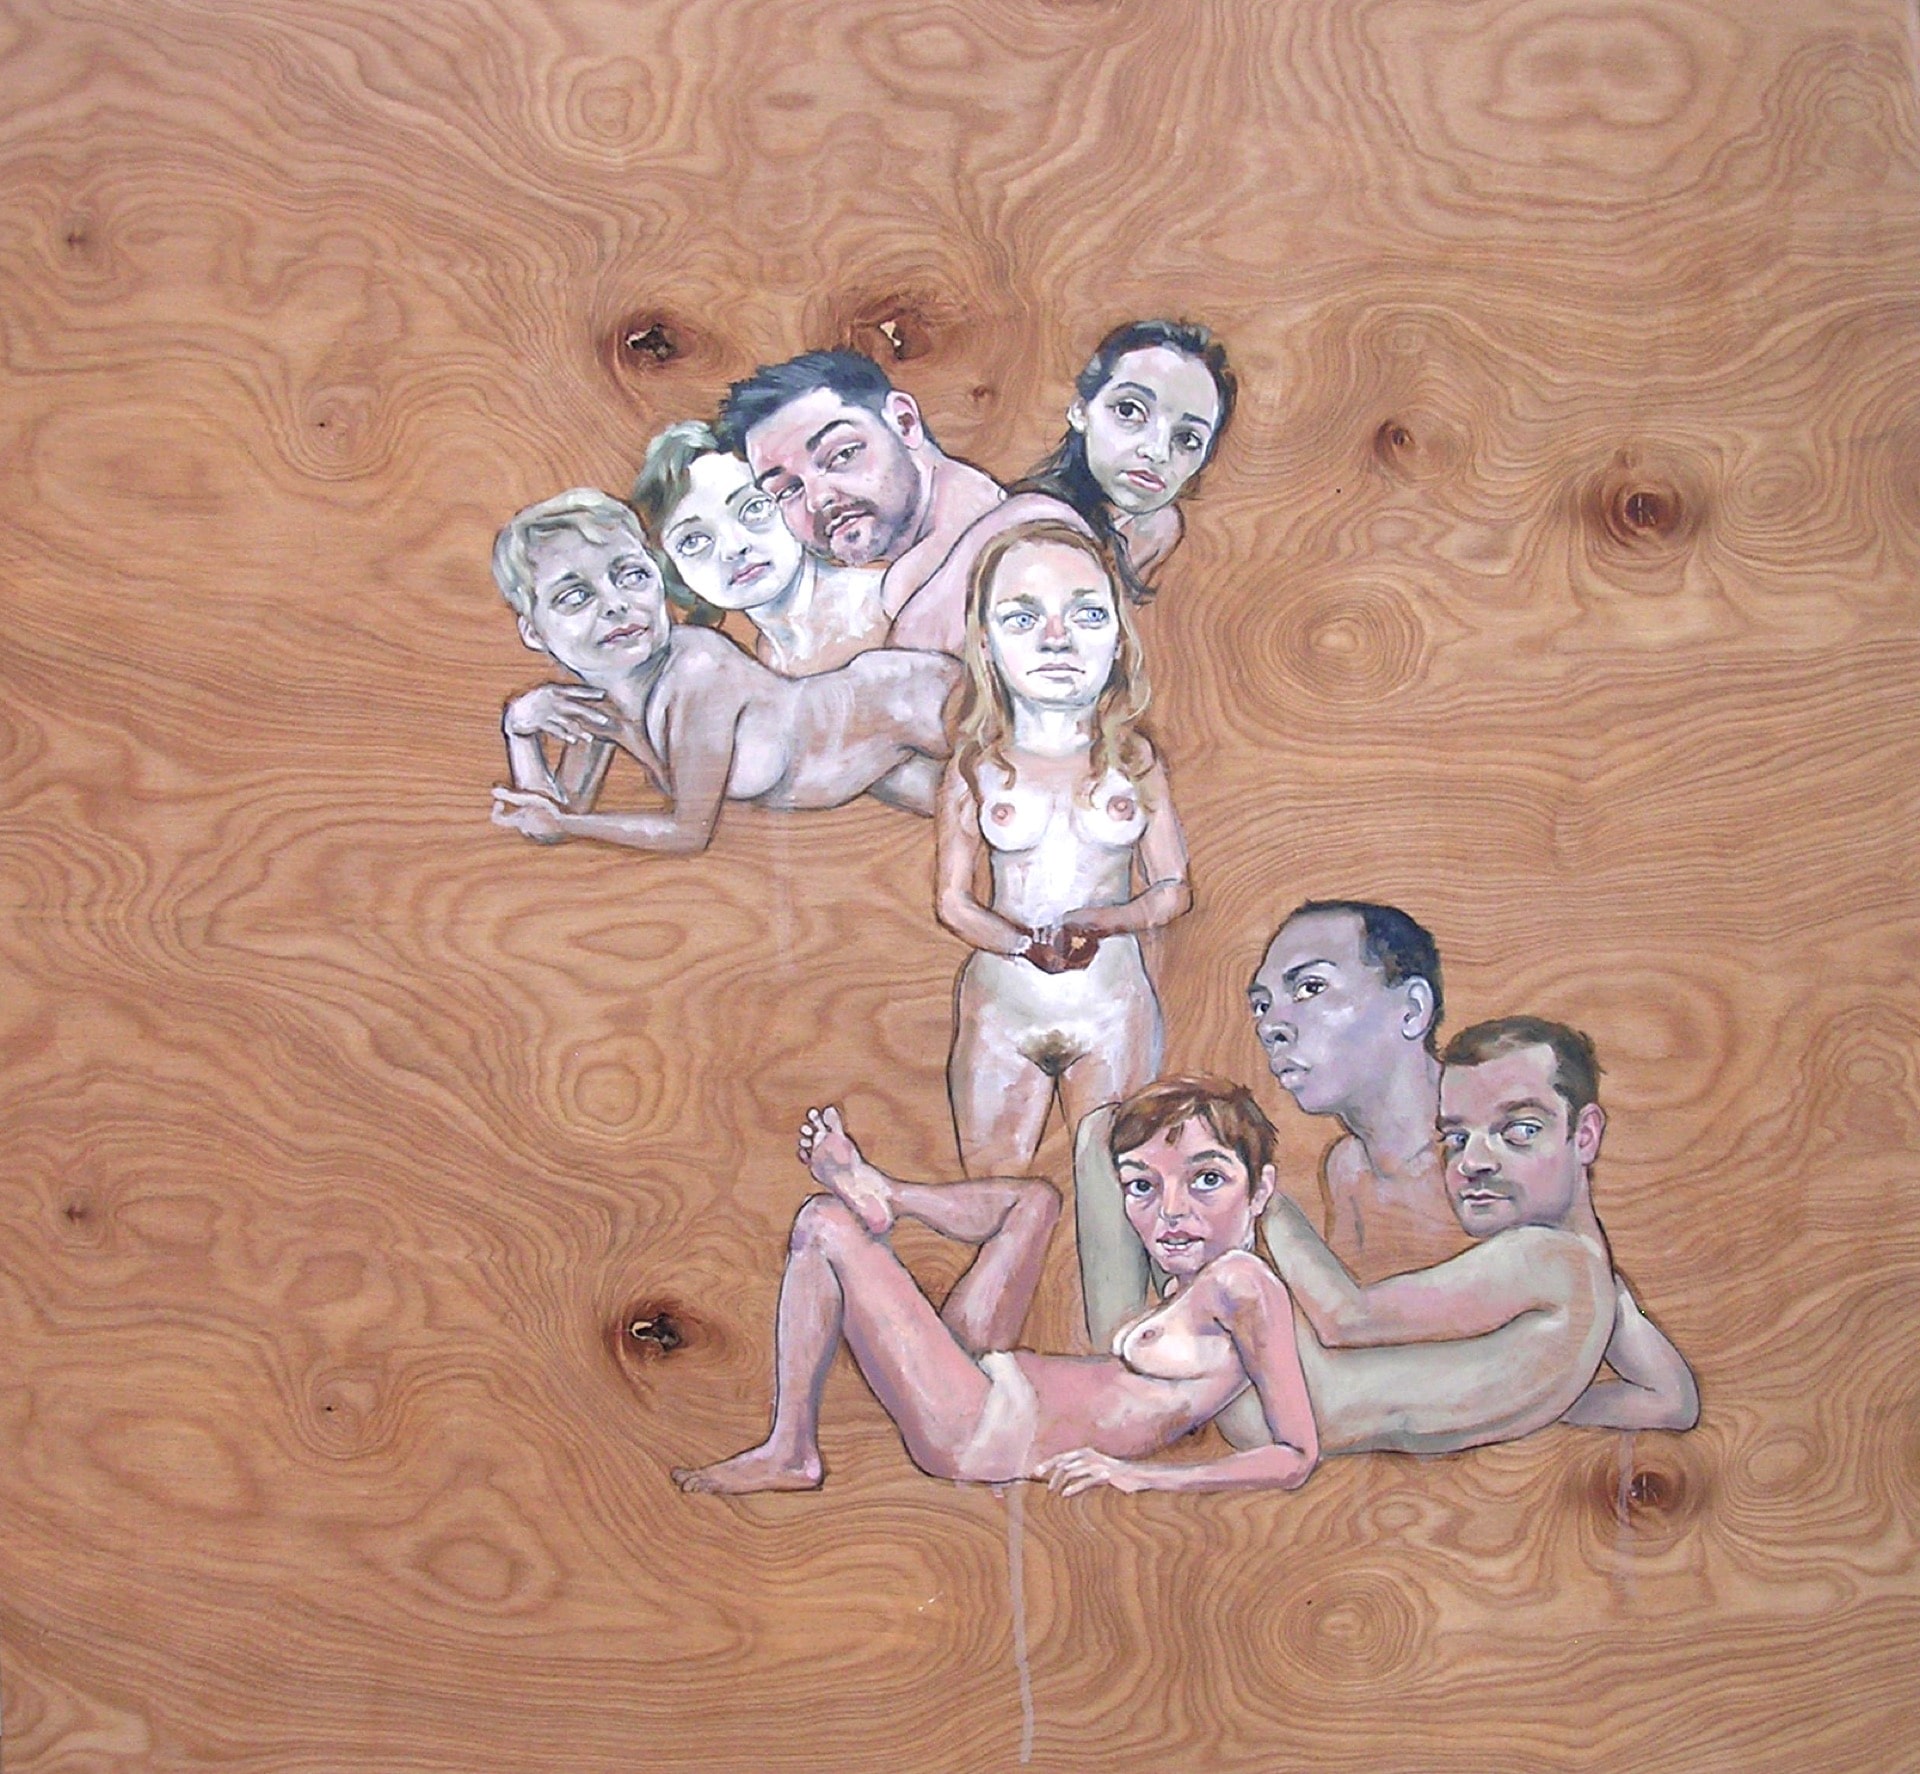  “Aleks with Seven Other Figures”, oil on wood, 48” x 48”, 2008.